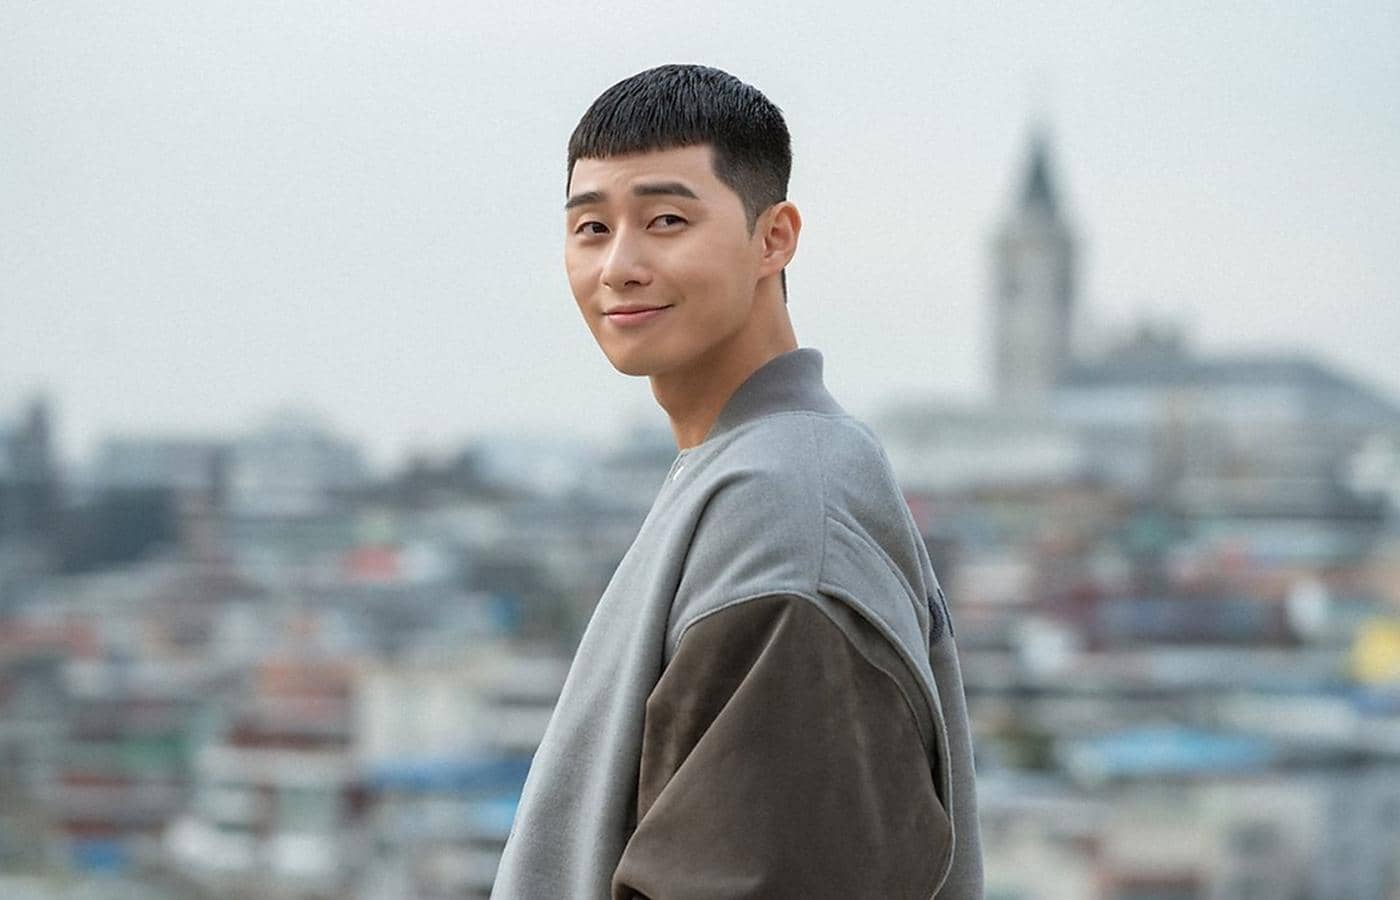 12 Things You Need To Know About "Itaewon Class" Lead Actor Park Seo-Joon | Metro.Style